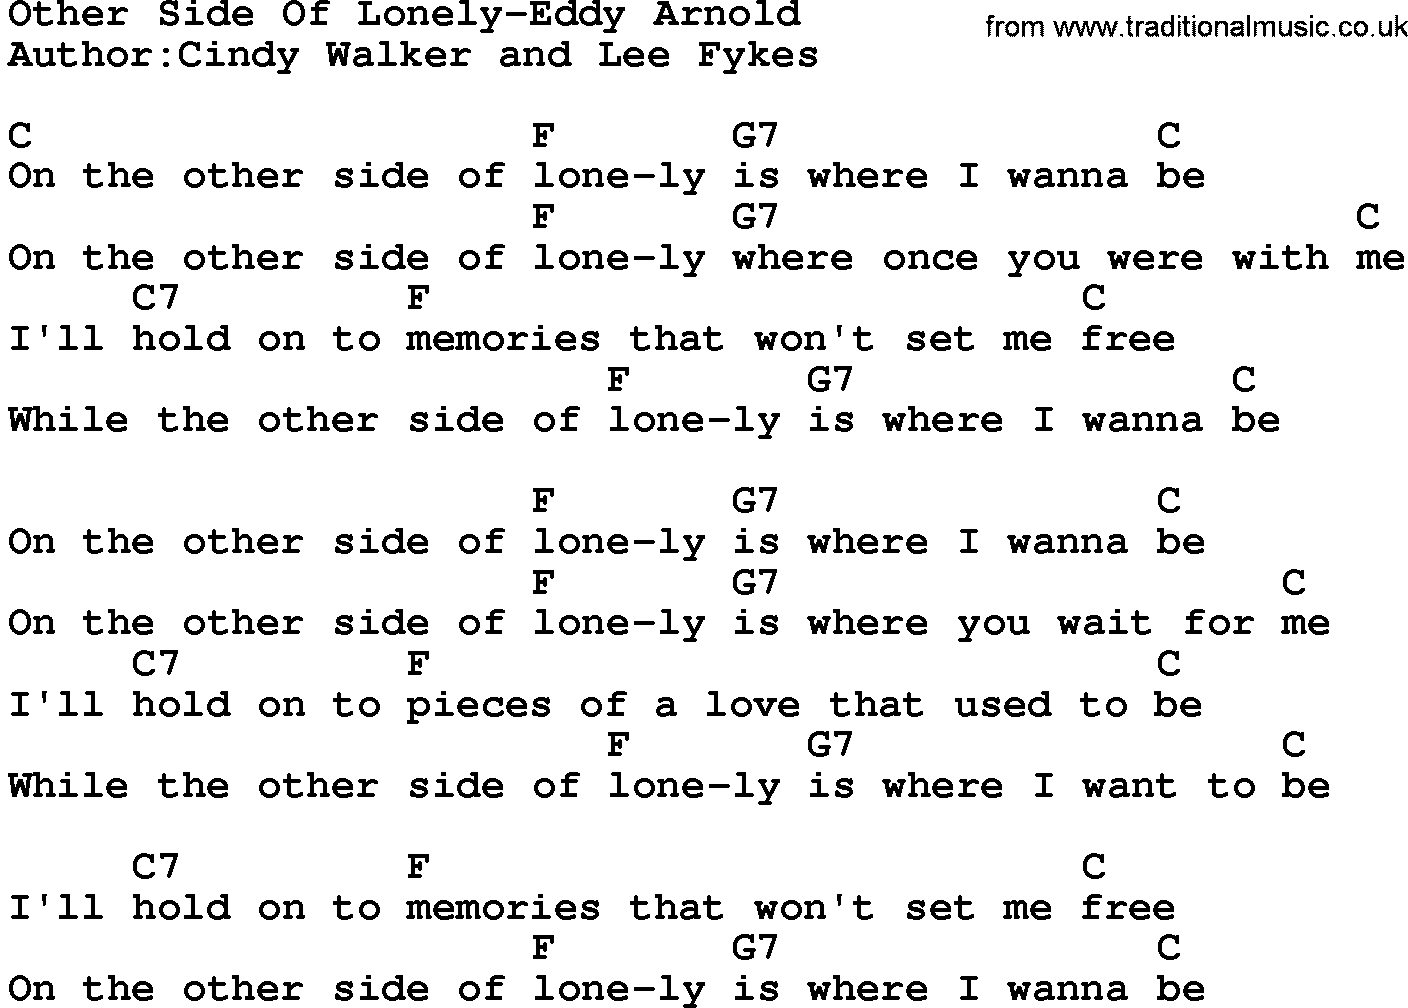 Country music song: Other Side Of Lonely-Eddy Arnold lyrics and chords